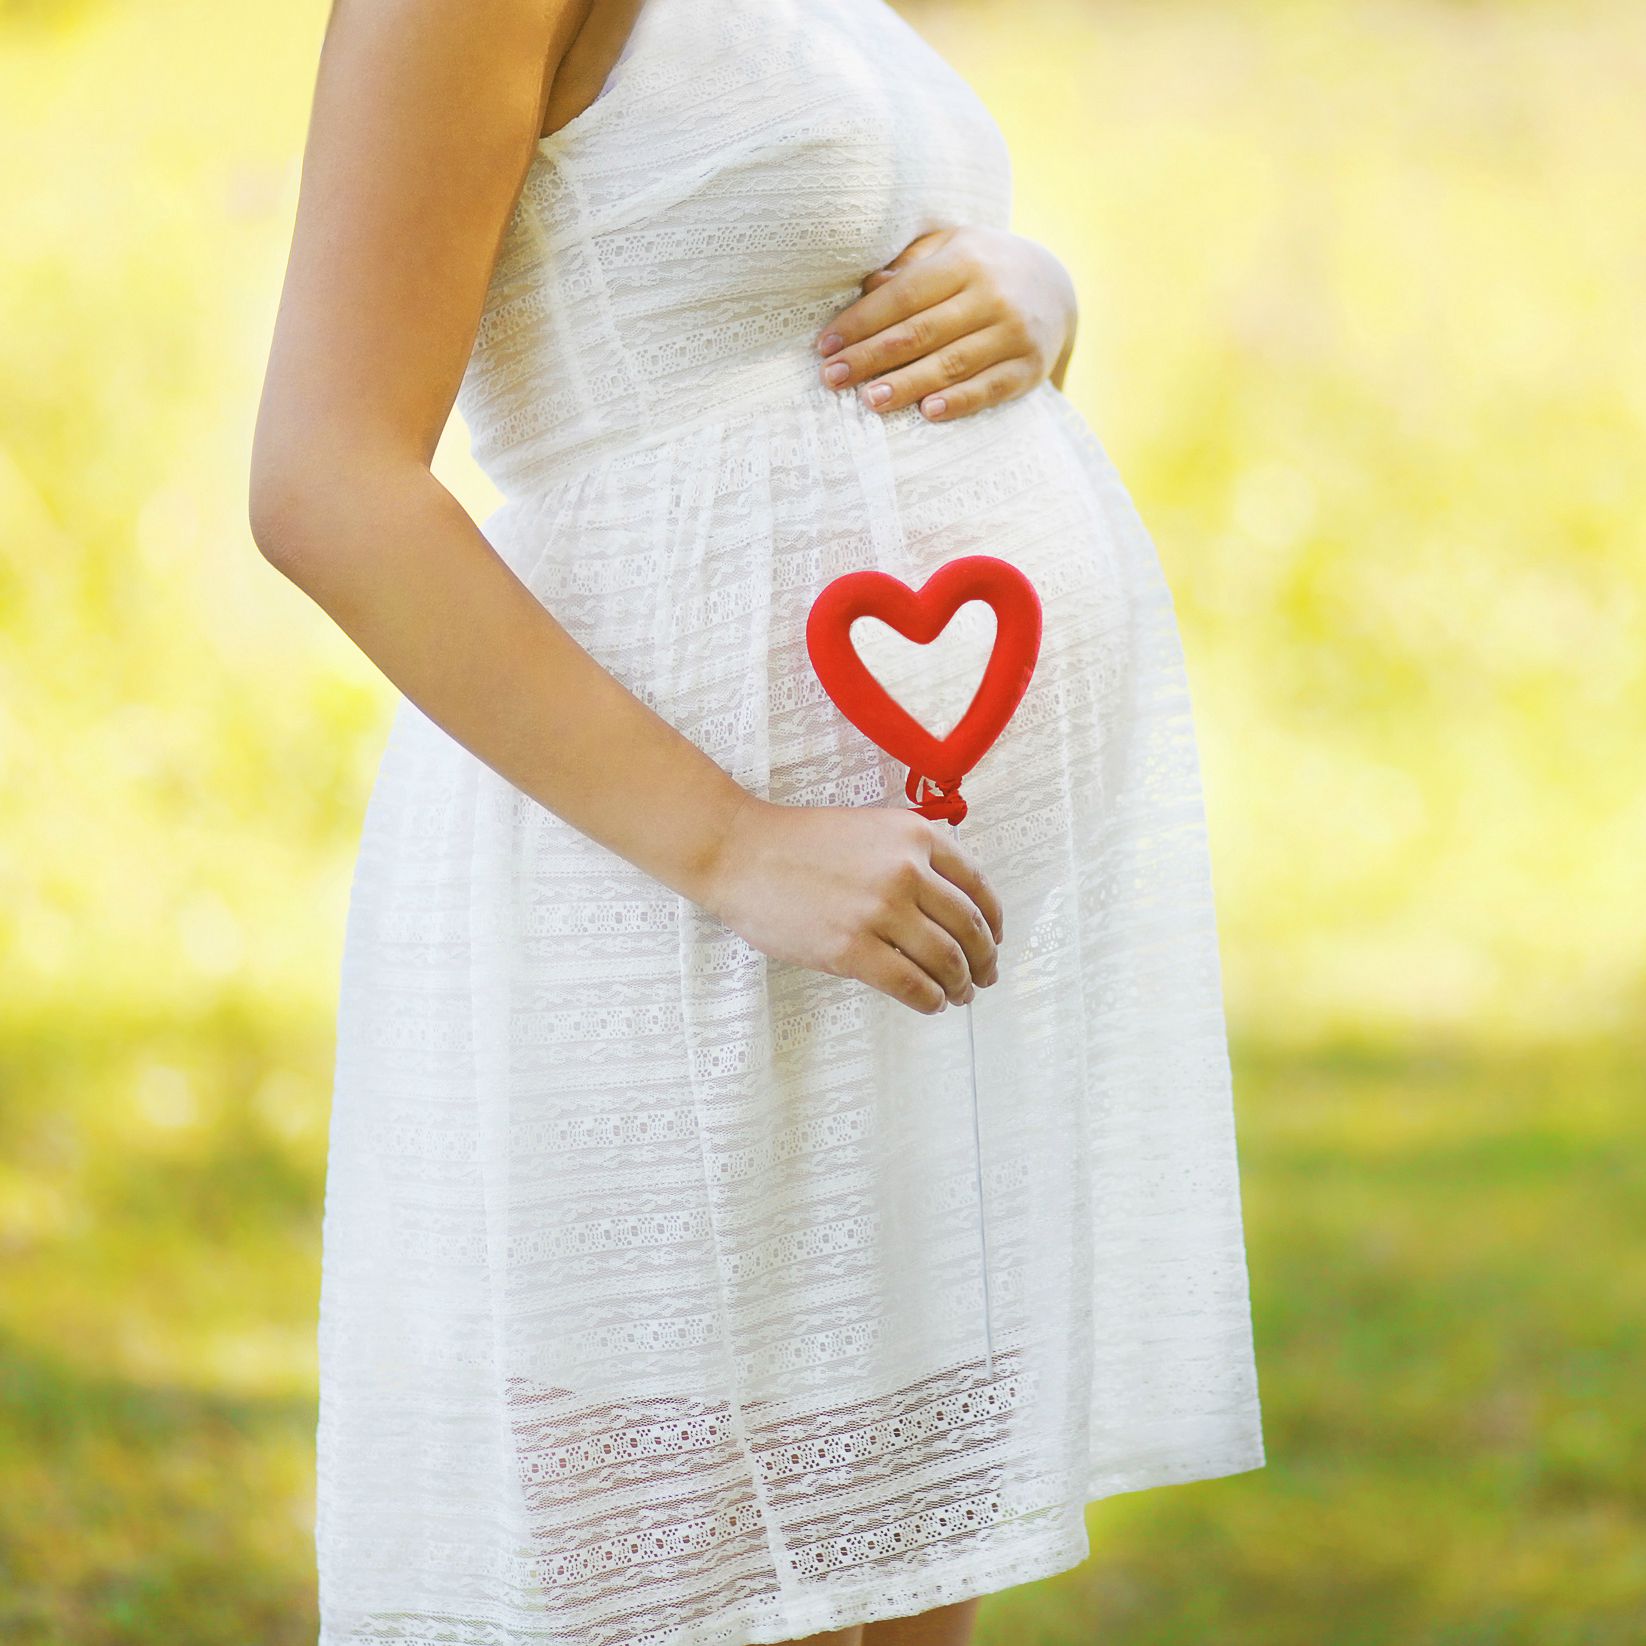 How to Make Your Second Pregnancy Just as Special as Your First